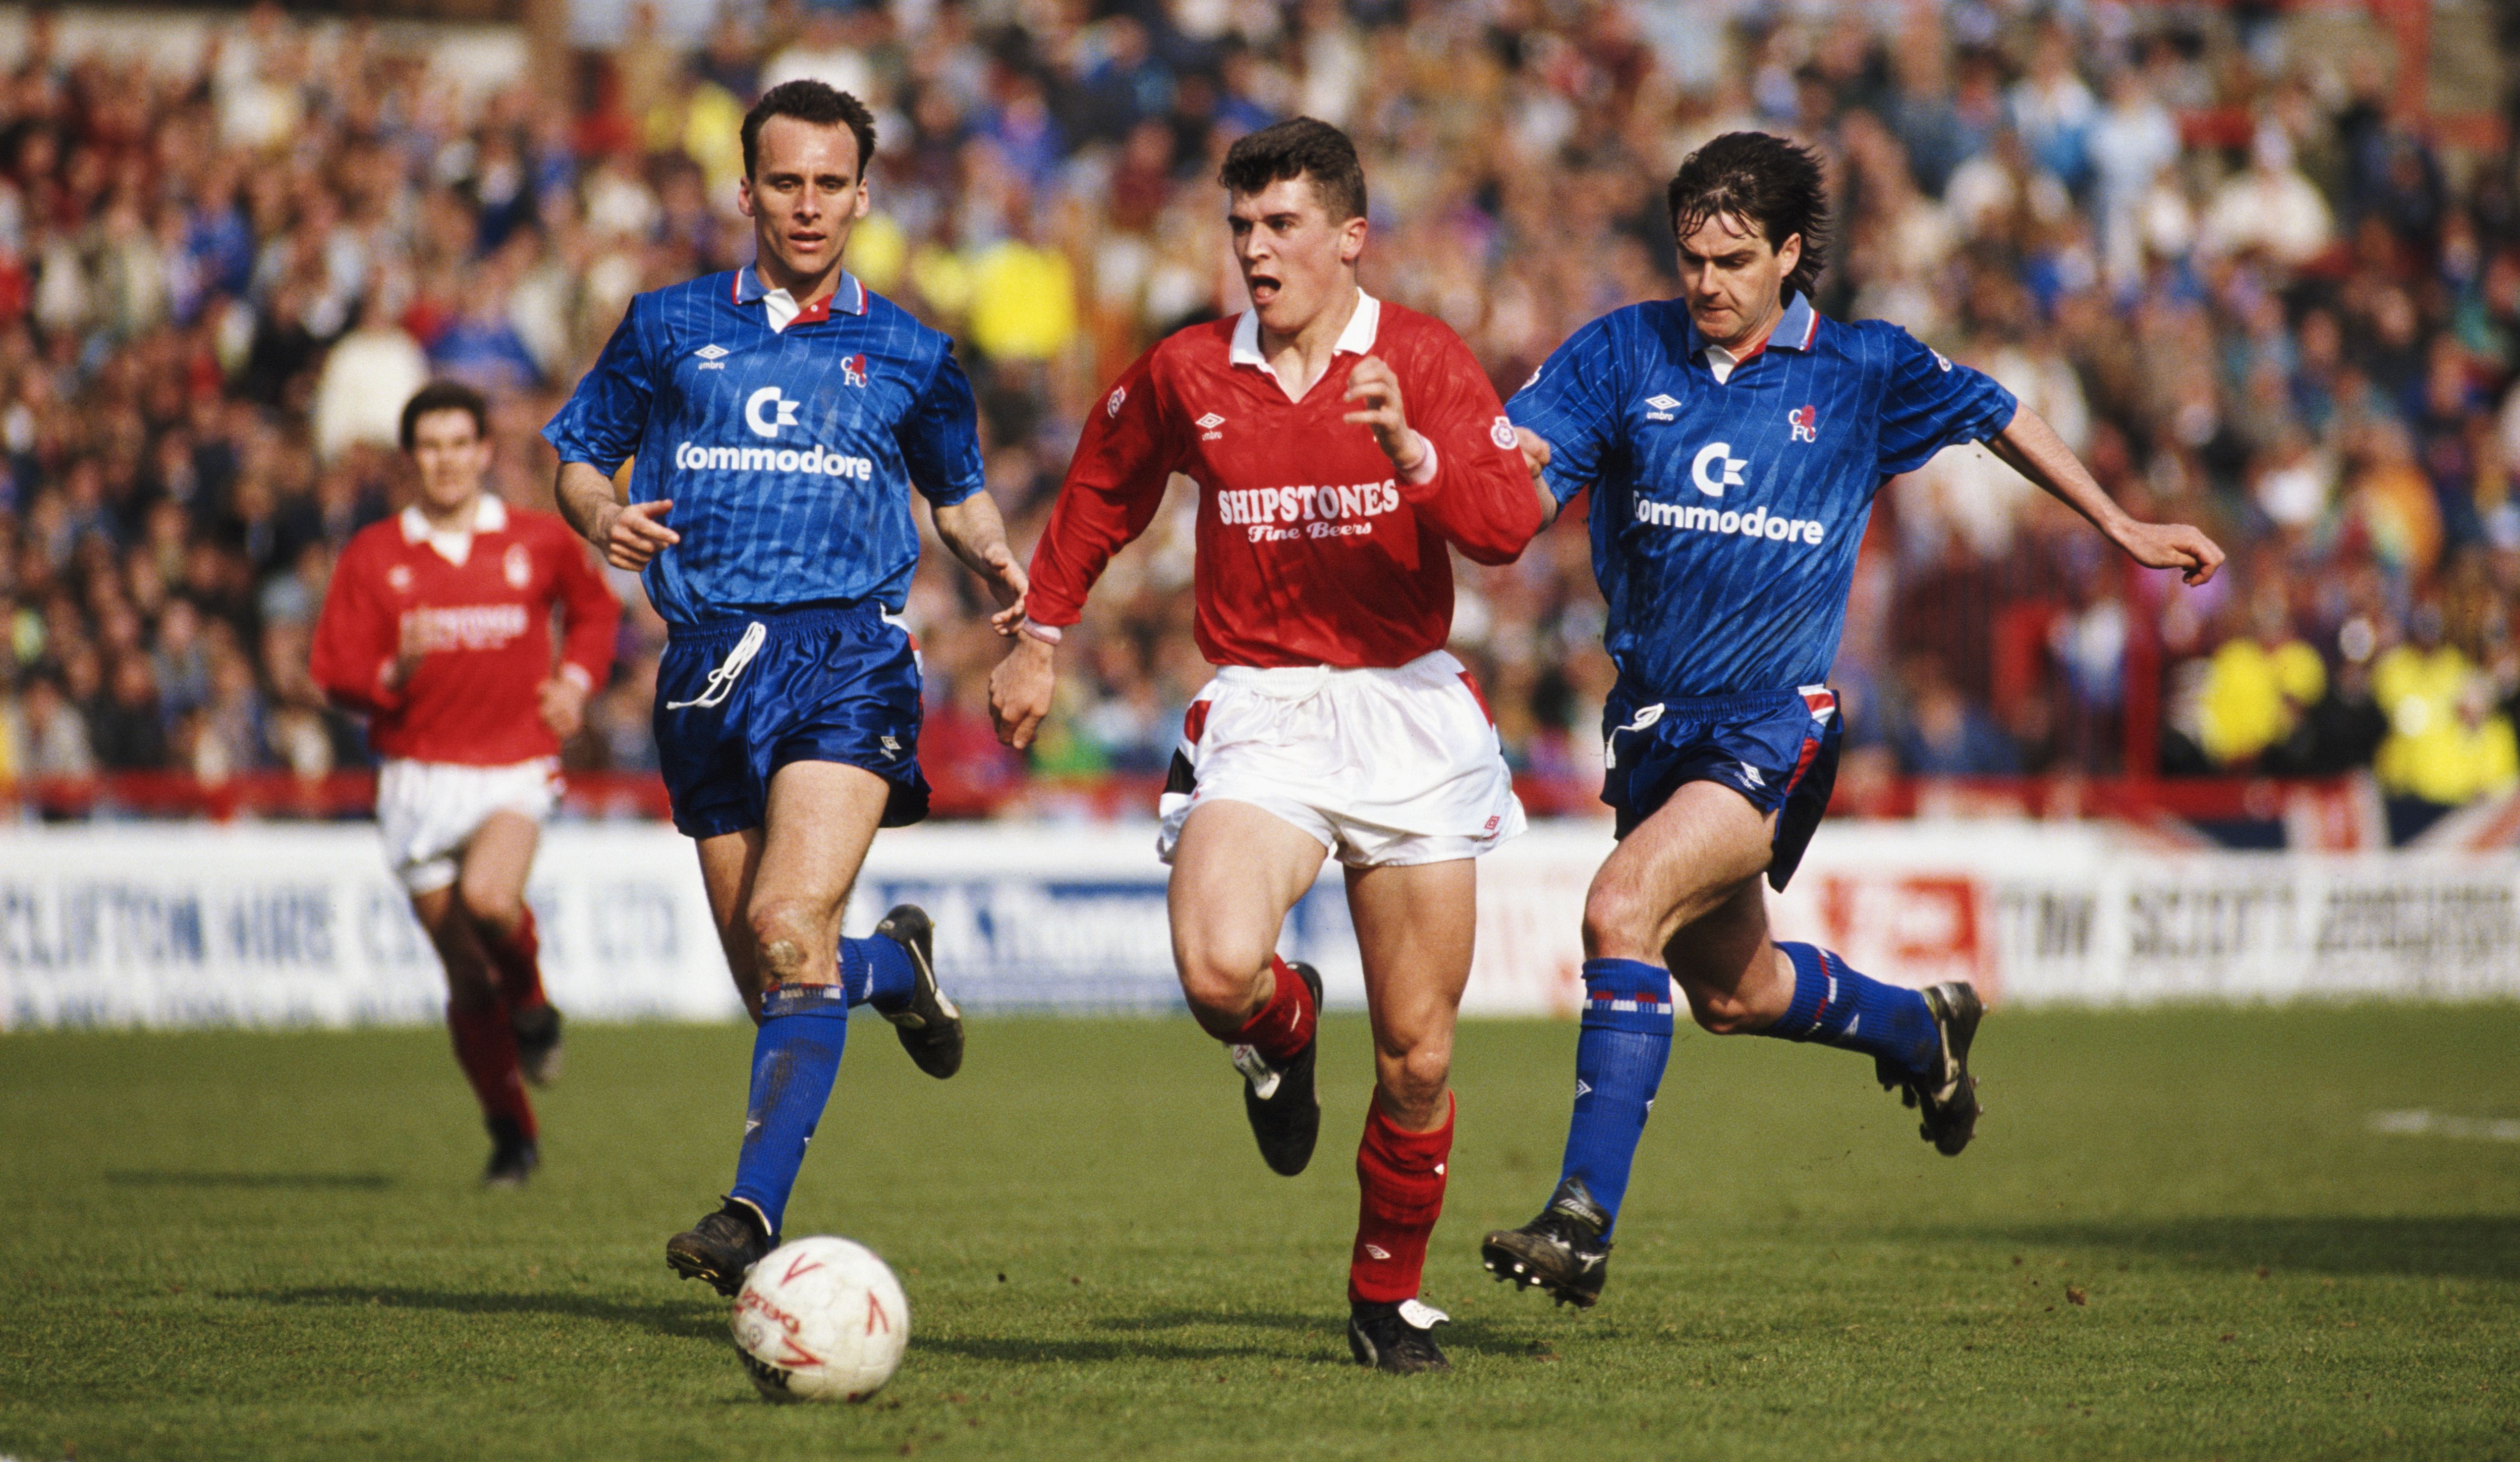 Nottingham Forest player Roy Keane (c) outpaces Alan Dickens (l) and Steve Clarke of Chelsea.